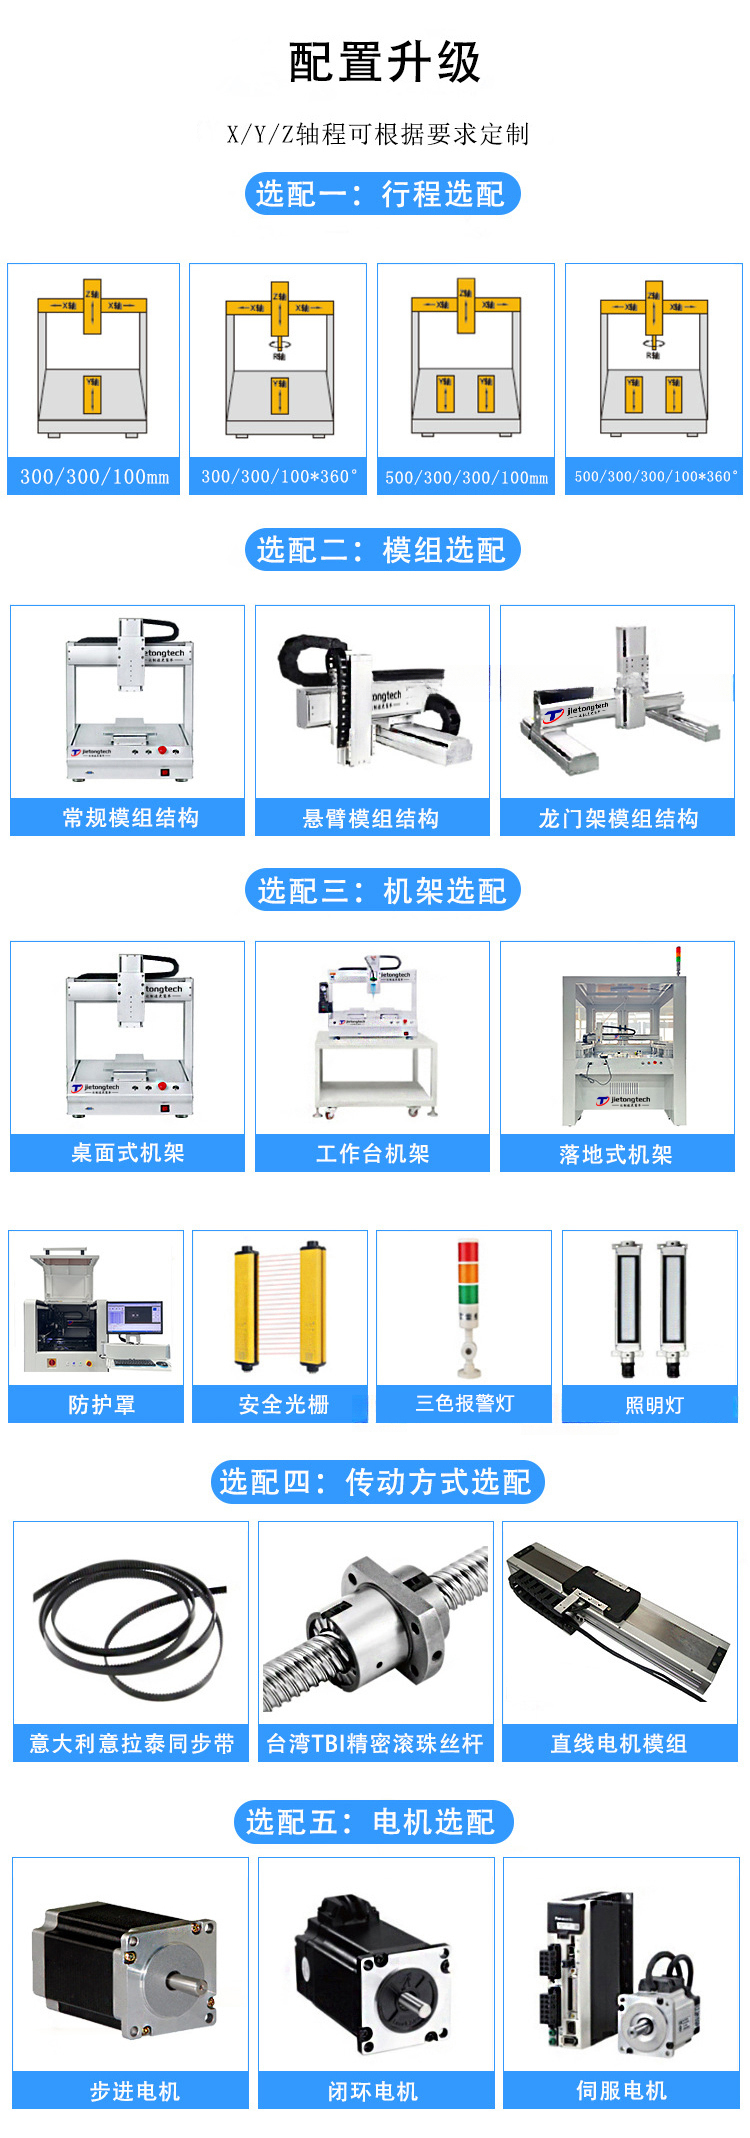 PCB soldering robot, electronic connector, fully automatic soldering machine equipment, computer-controlled soldering system